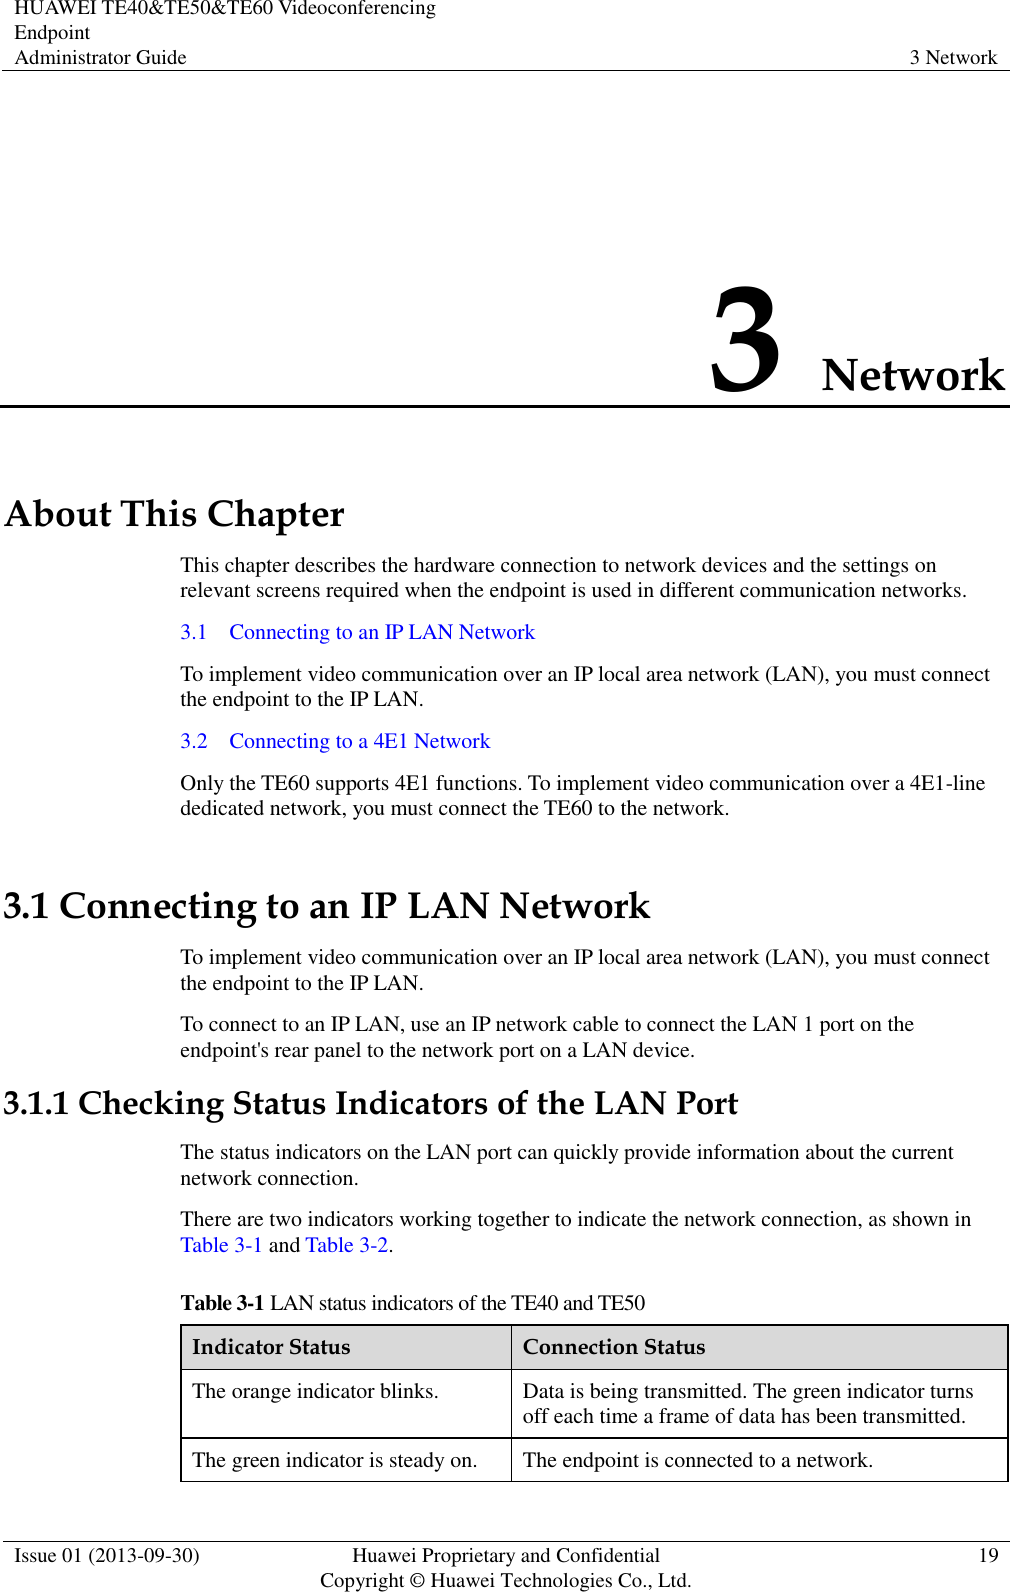 HUAWEI TE40&amp;TE50&amp;TE60 Videoconferencing Endpoint Administrator Guide 3 Network  Issue 01 (2013-09-30) Huawei Proprietary and Confidential                                     Copyright © Huawei Technologies Co., Ltd. 19  3 Network About This Chapter This chapter describes the hardware connection to network devices and the settings on relevant screens required when the endpoint is used in different communication networks. 3.1    Connecting to an IP LAN Network To implement video communication over an IP local area network (LAN), you must connect the endpoint to the IP LAN. 3.2    Connecting to a 4E1 Network Only the TE60 supports 4E1 functions. To implement video communication over a 4E1-line dedicated network, you must connect the TE60 to the network. 3.1 Connecting to an IP LAN Network To implement video communication over an IP local area network (LAN), you must connect the endpoint to the IP LAN. To connect to an IP LAN, use an IP network cable to connect the LAN 1 port on the endpoint&apos;s rear panel to the network port on a LAN device. 3.1.1 Checking Status Indicators of the LAN Port The status indicators on the LAN port can quickly provide information about the current network connection. There are two indicators working together to indicate the network connection, as shown in Table 3-1 and Table 3-2. Table 3-1 LAN status indicators of the TE40 and TE50 Indicator Status Connection Status The orange indicator blinks. Data is being transmitted. The green indicator turns off each time a frame of data has been transmitted. The green indicator is steady on. The endpoint is connected to a network. 